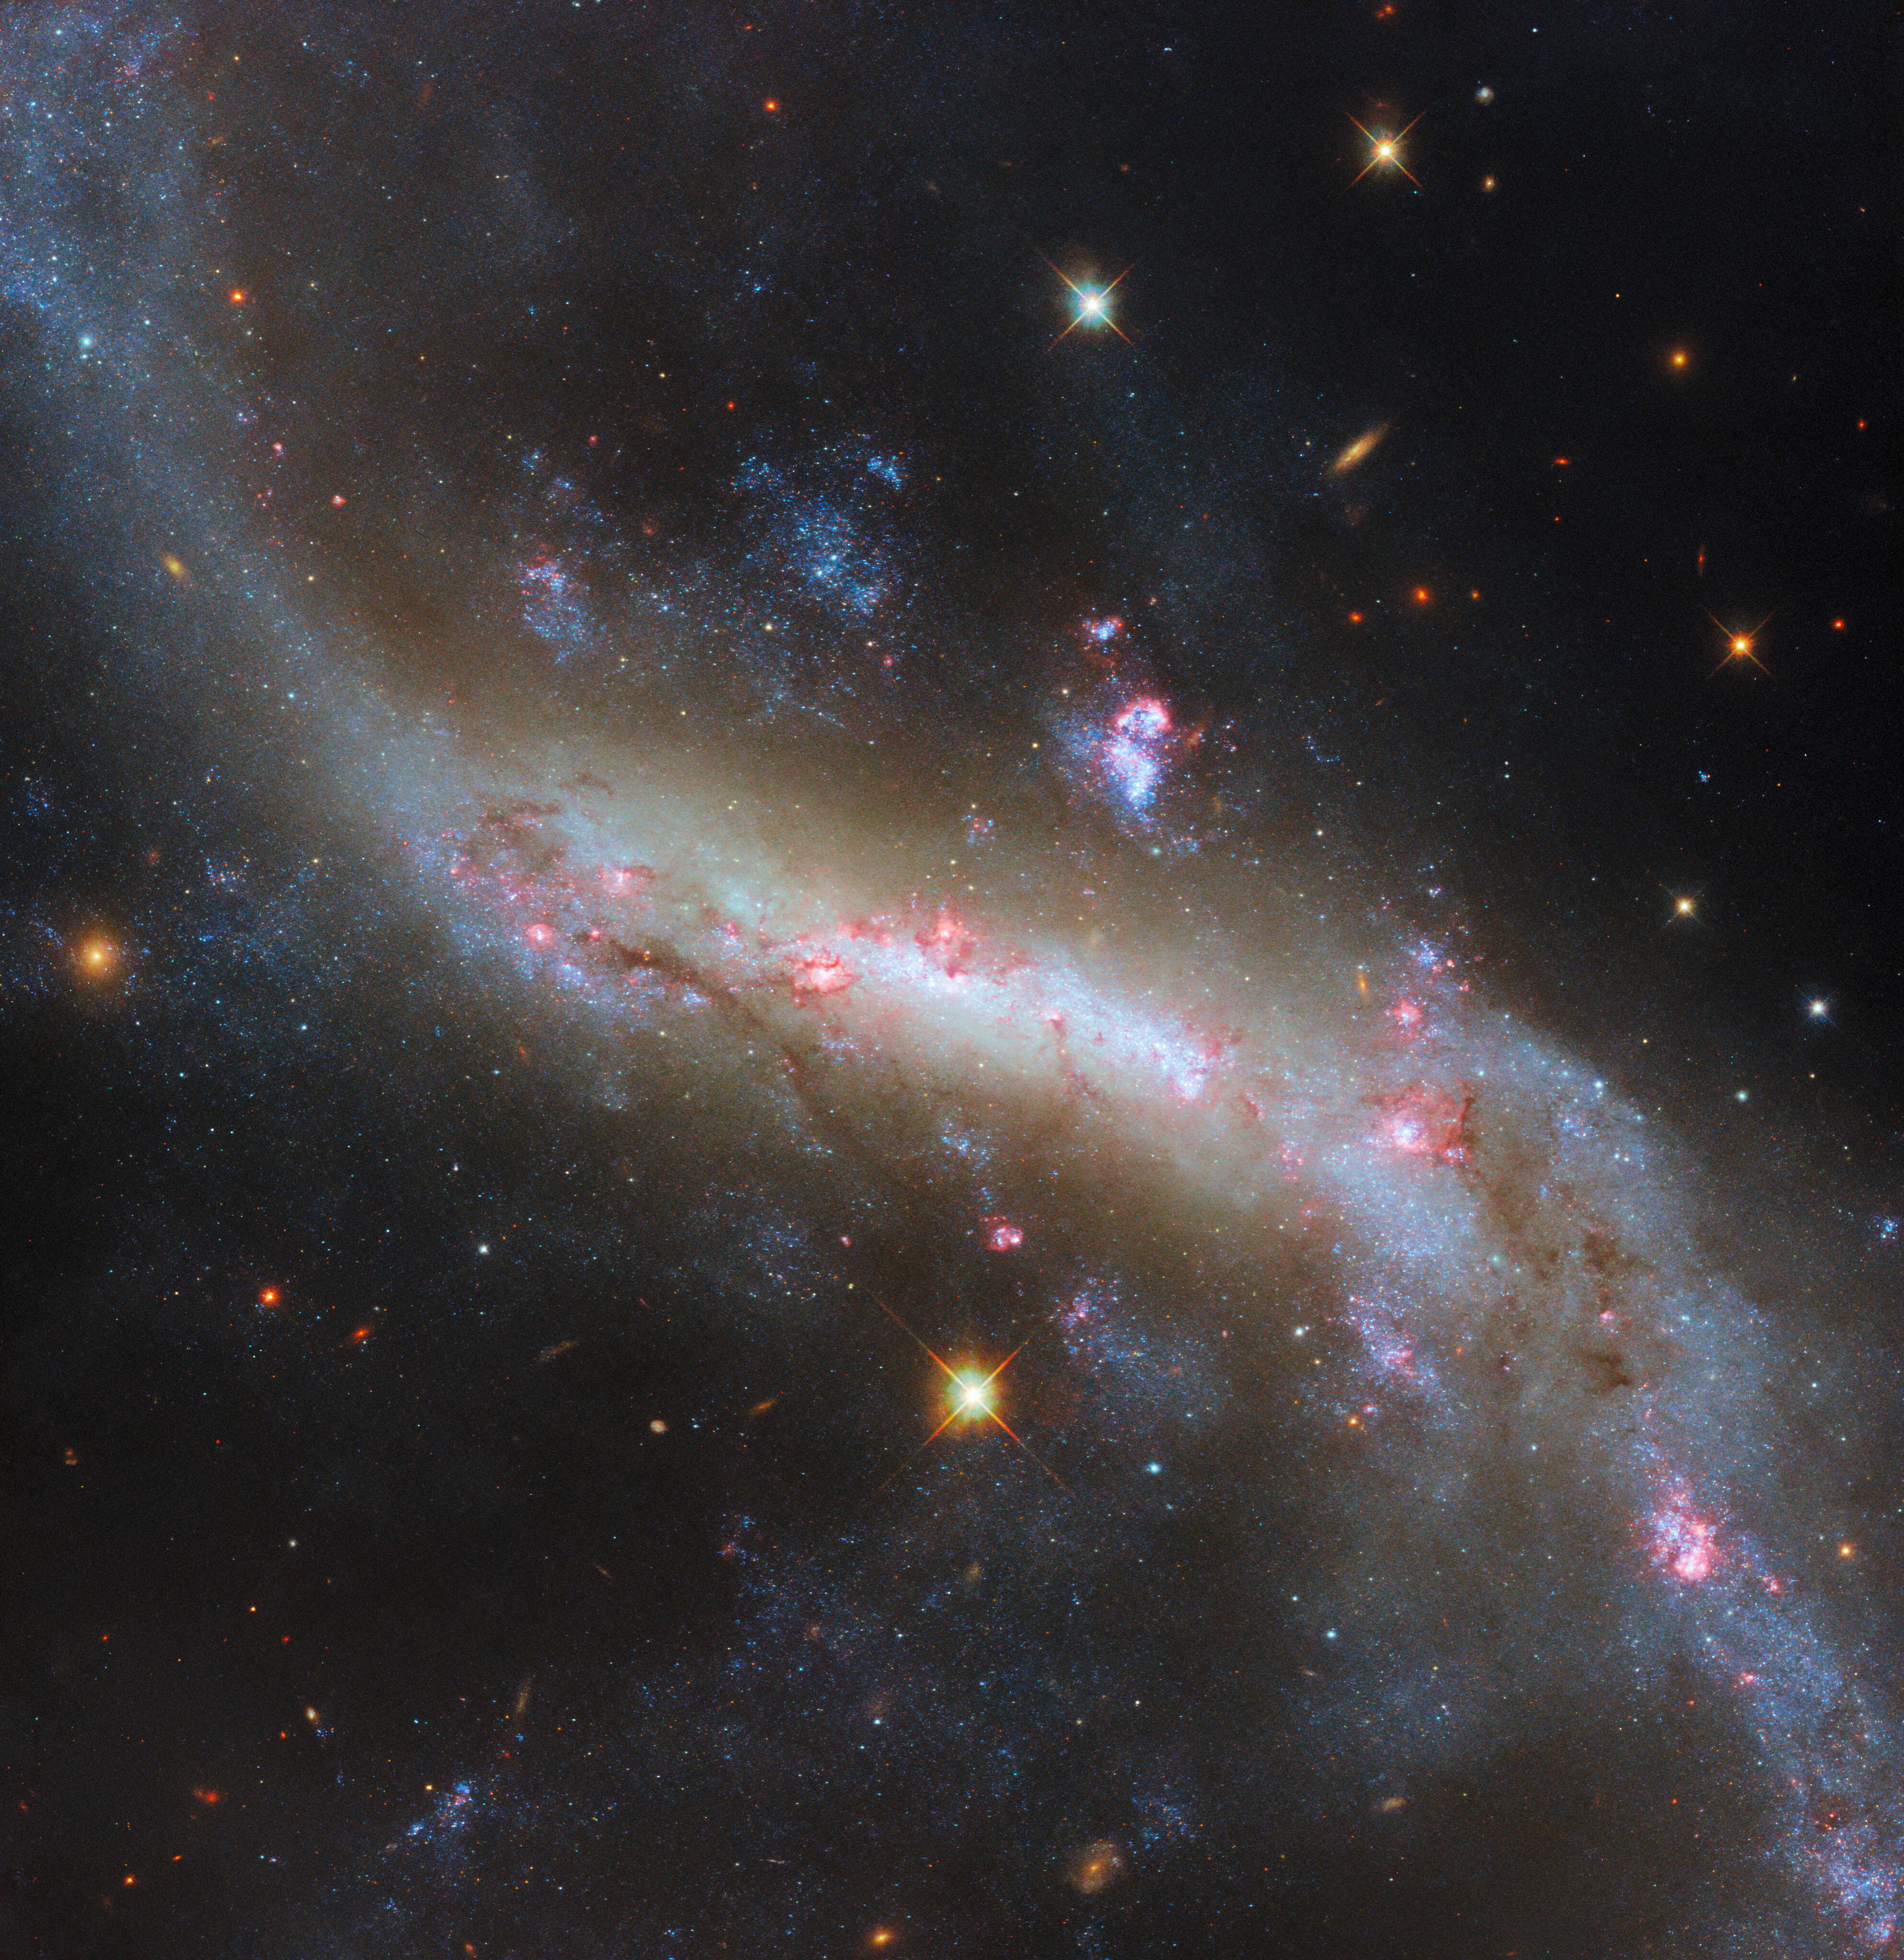 A close-in view of a barred spiral galaxy. The bright, glowing bar crosses the center of the galaxy, with spiral arms curving away from the bar’s ends and continuing out of view. Bright patches of light where stars are forming surround the bar, which also holds dark lines of dust. The galaxy’s clouds of gas spread out from its arms and bar, giving way to a dark background with some foreground stars and small, distant galaxies.